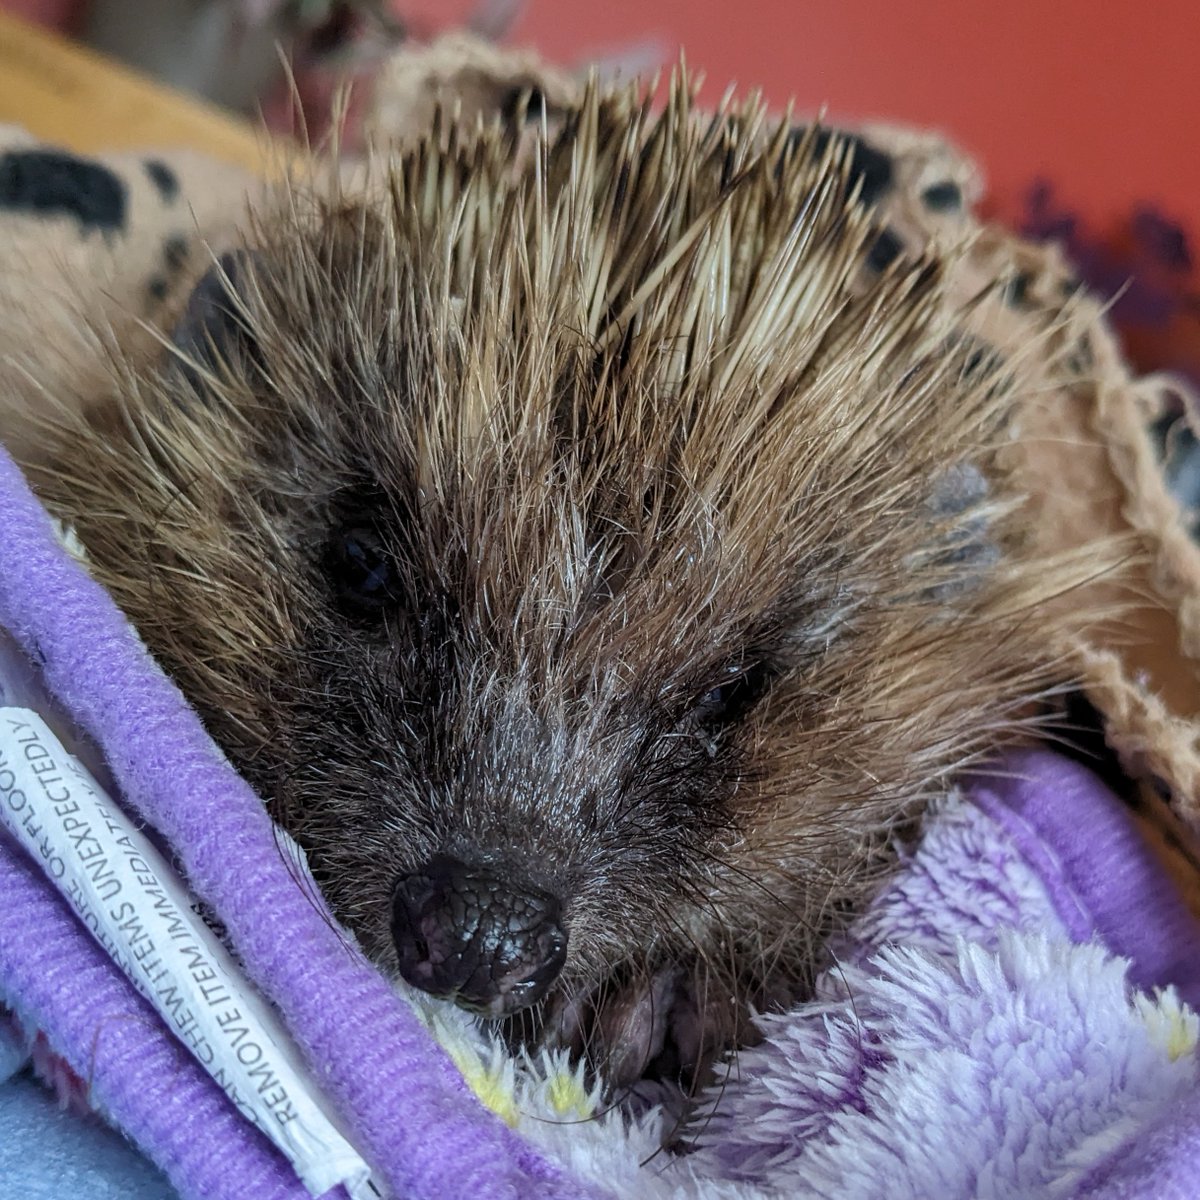 It's Hedgehog Awareness Week! Tell us below how you'll be helping hedgehogs this week (and longer term!).

Cheeky we know but you can help them by a little donation to our PayPal.me/hhrc6 ☺️

#HedgehogAwarenessWeek
#hedgehogs
#HedgehogWeek 
#pricklypals